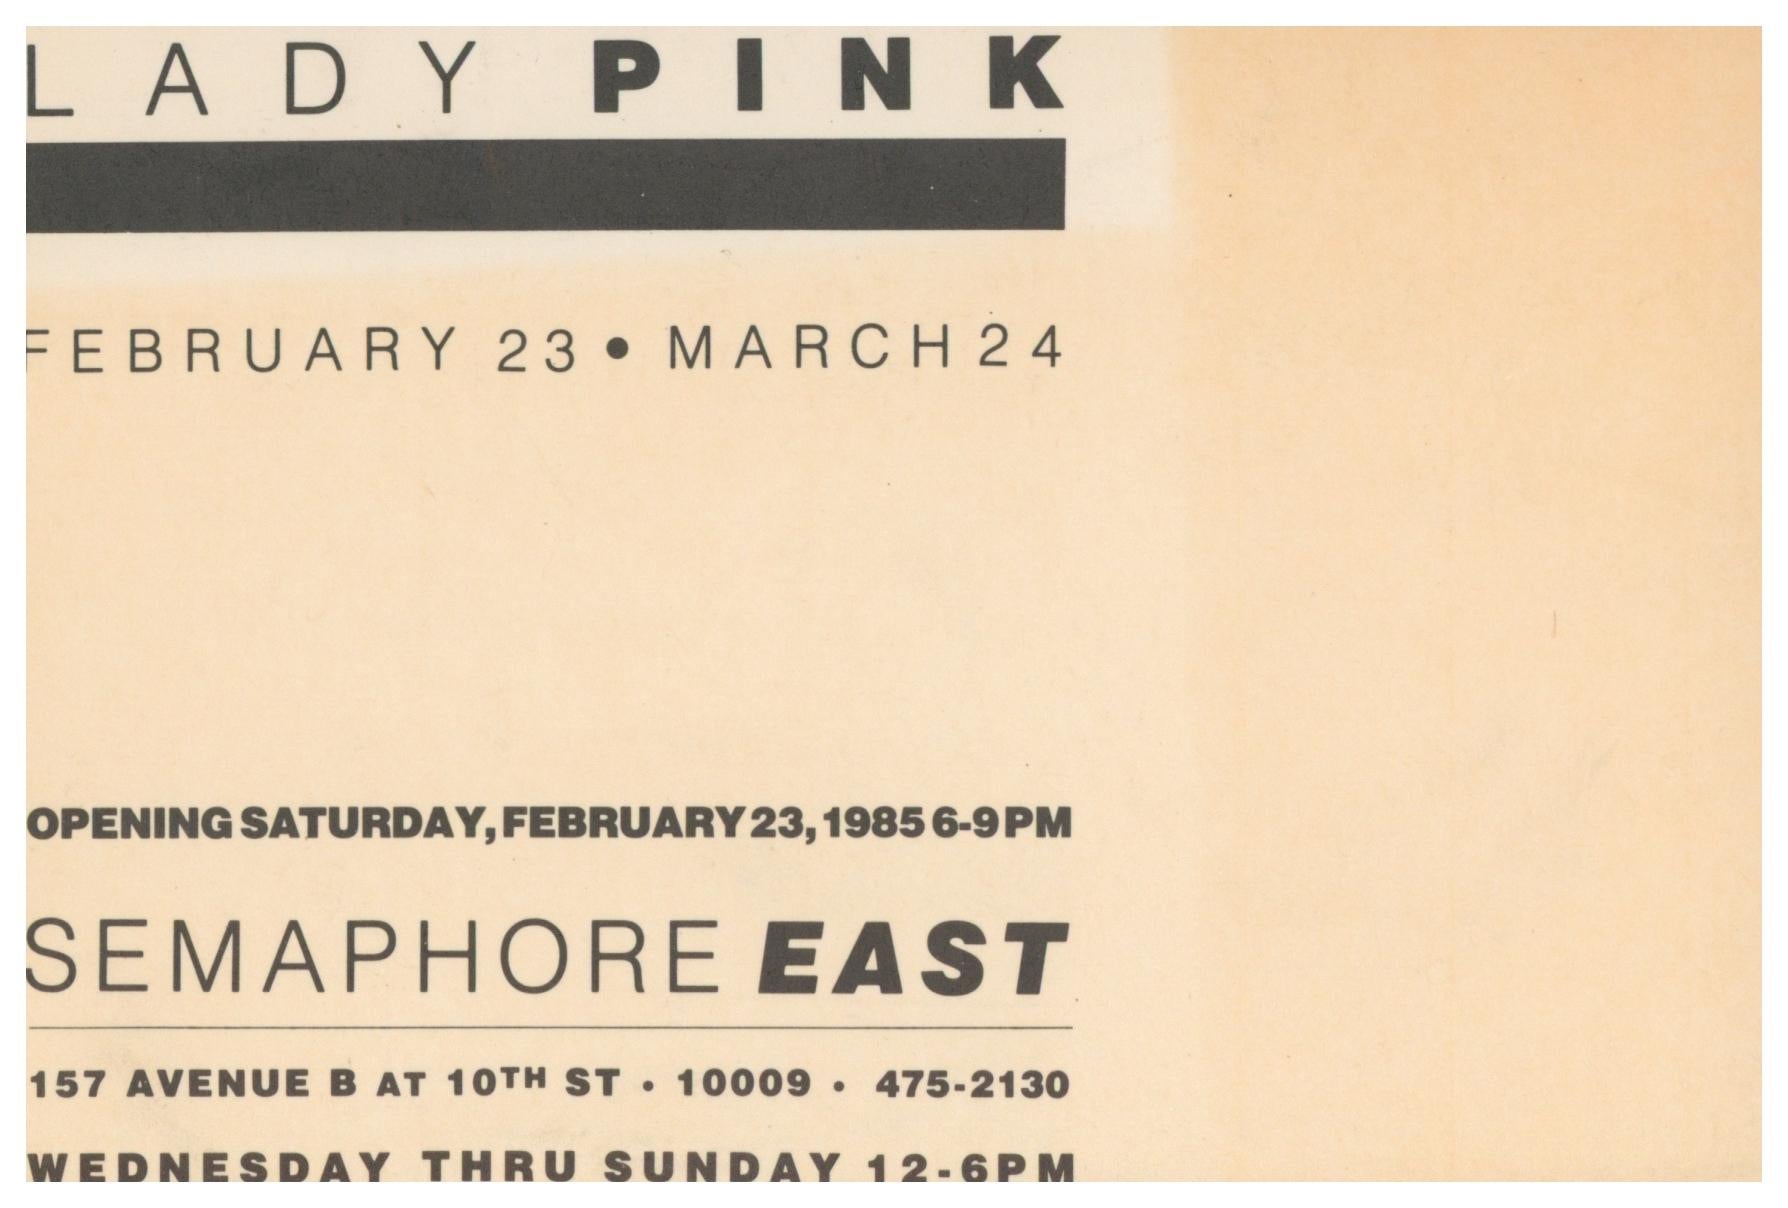 Lady Pink 1985 announcement 1